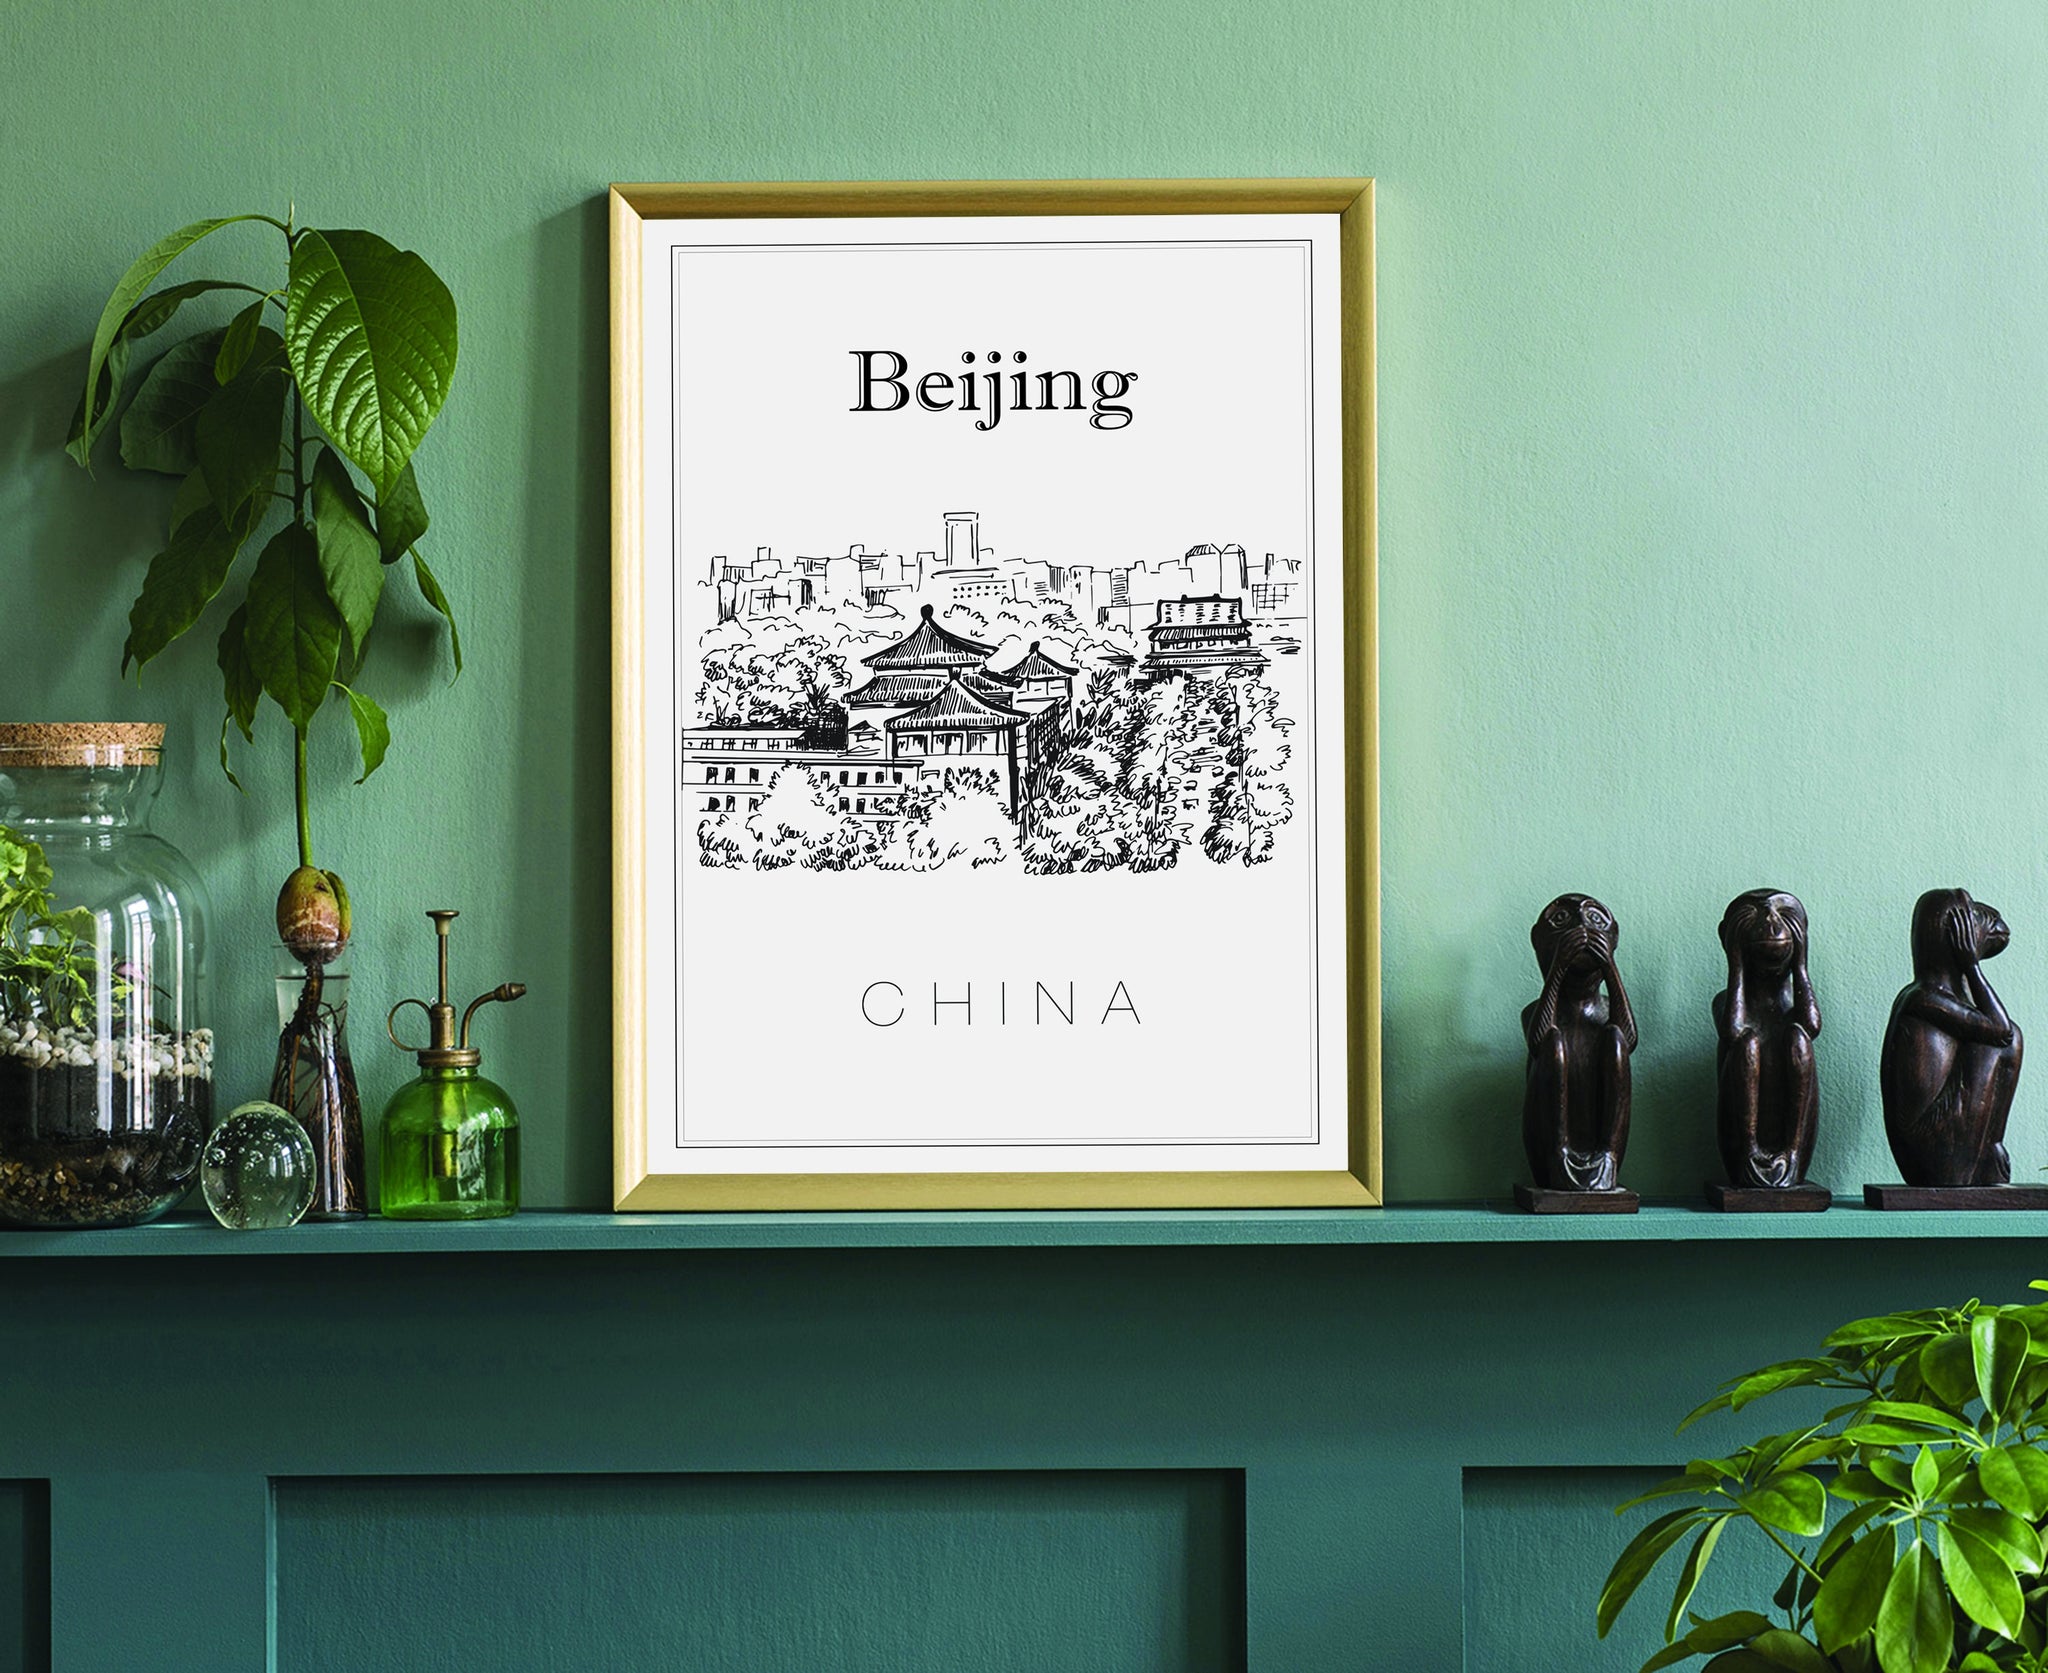 Hand Drawn Poster, Beijing Travel Poster, China Poster Wall Art, Beijing Cityscape and Landmark Map, City Map Poster For Home and Office